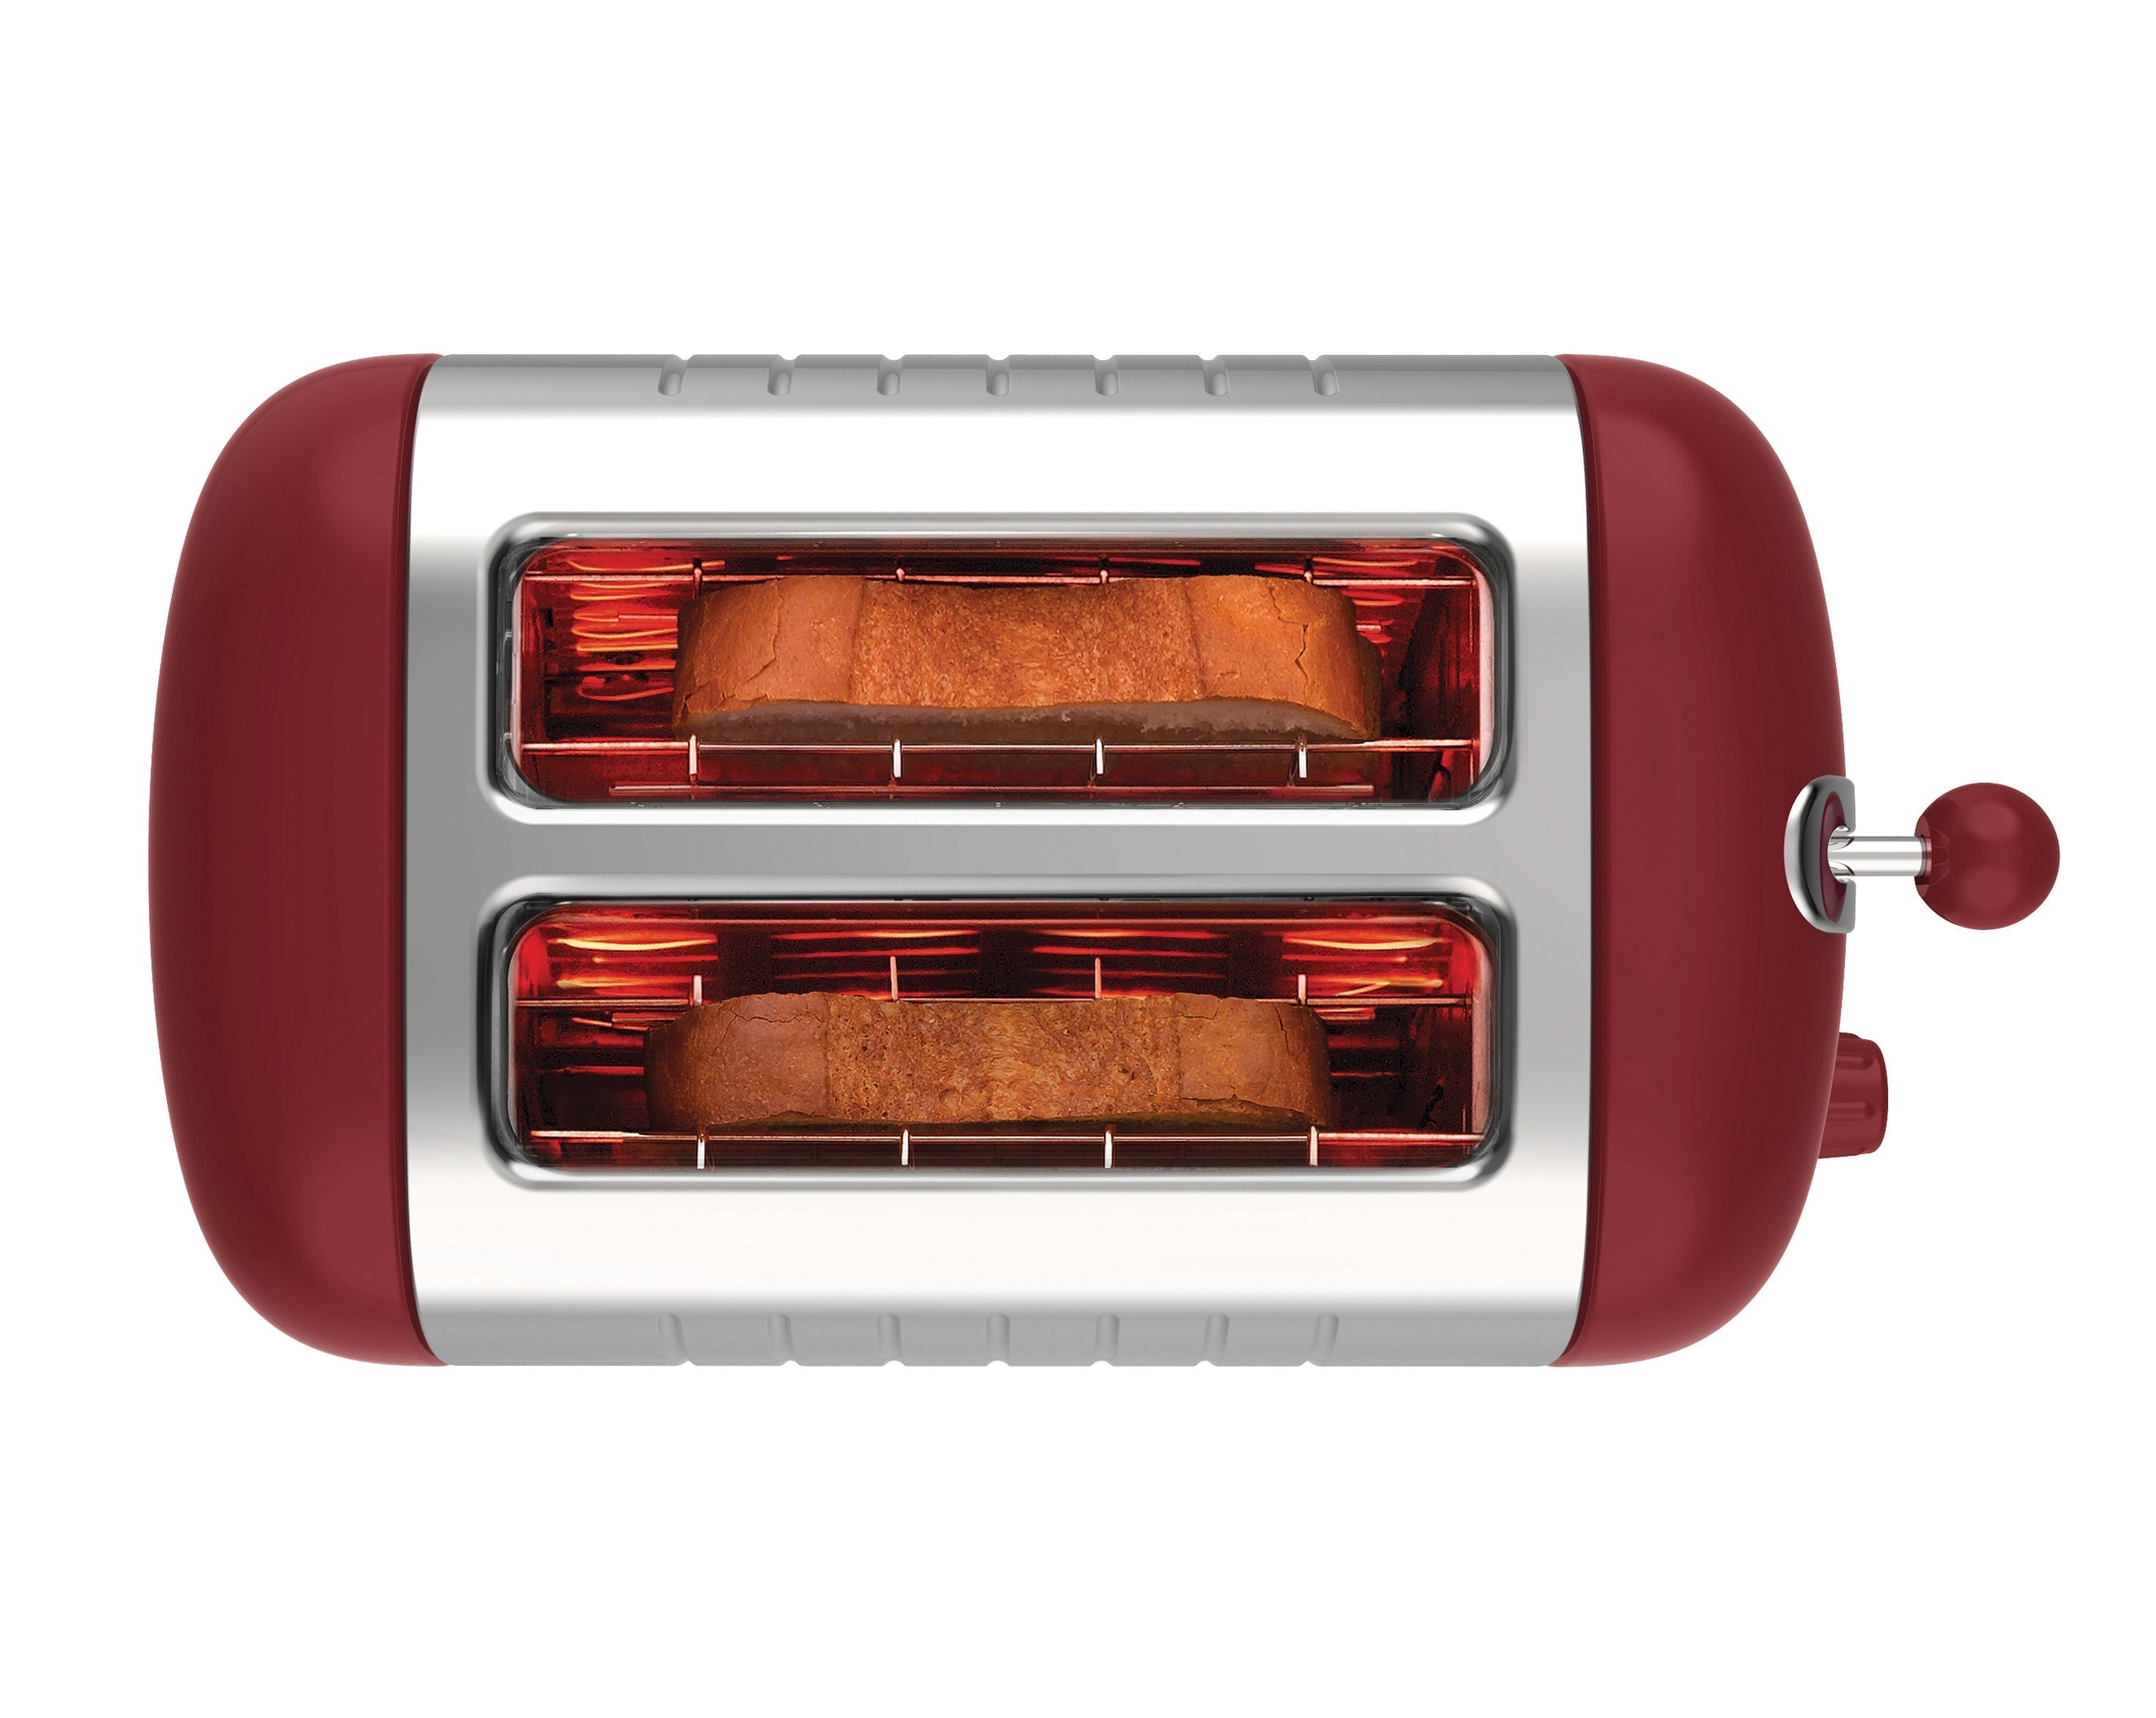 Toaster Dualit Lite 2, rouge